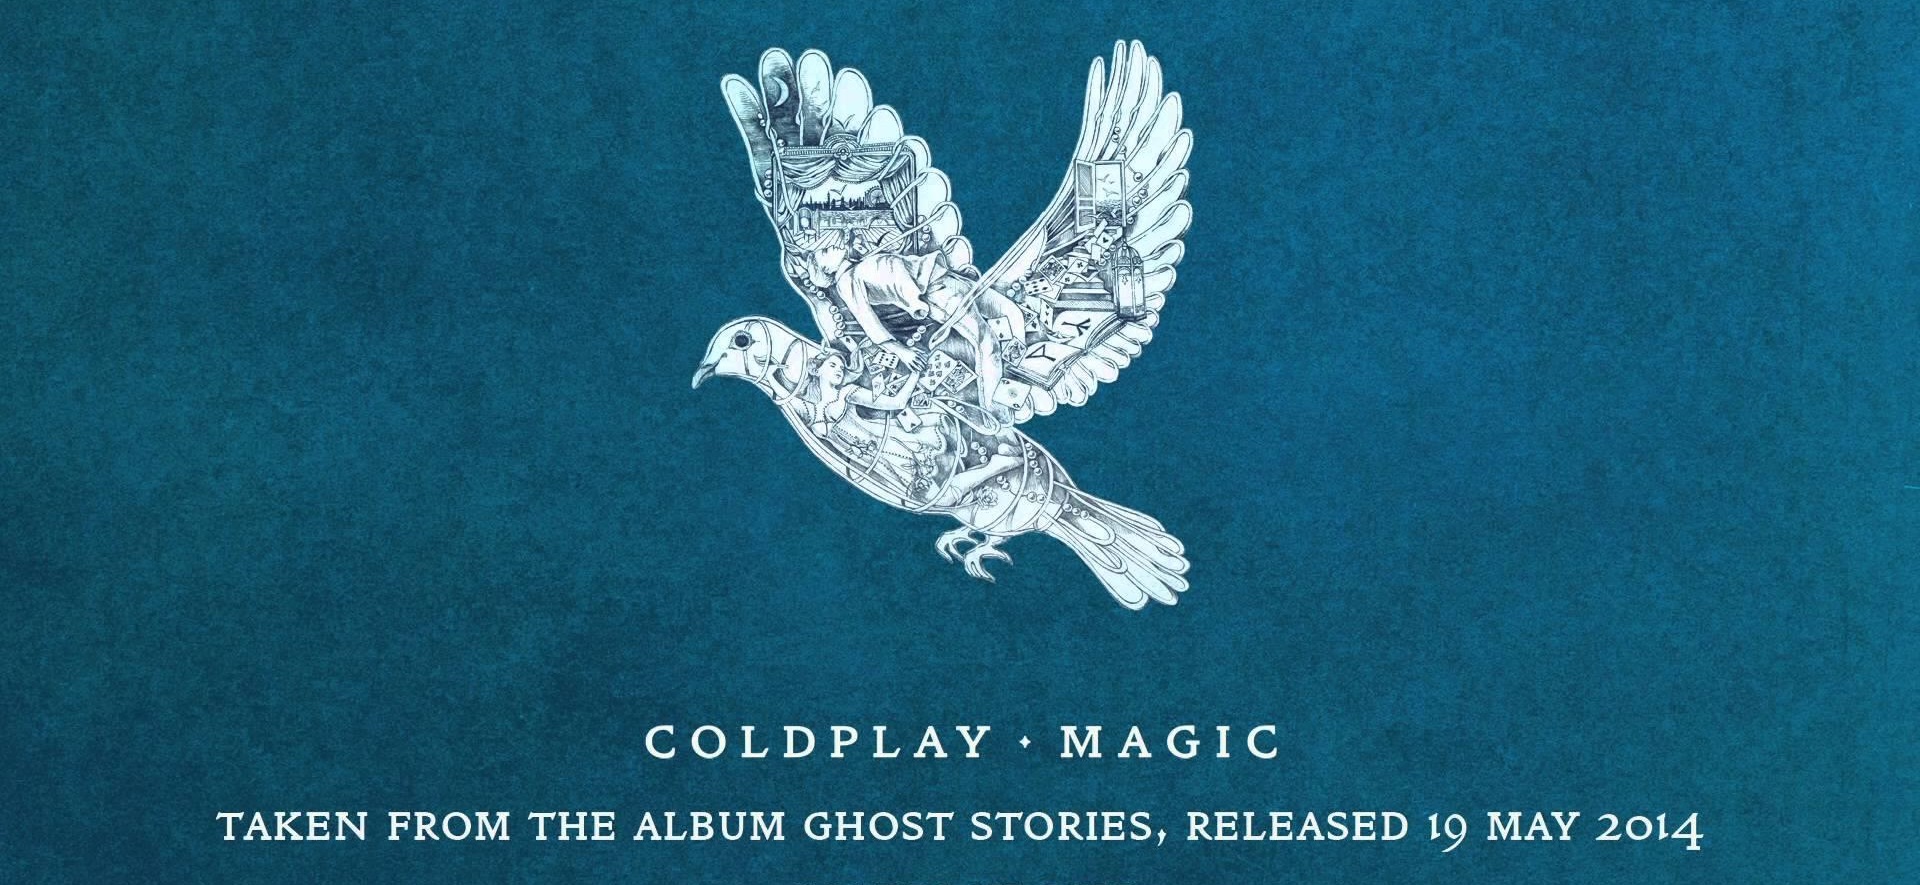 COLDPLAY PREMIERE NEW MUSIC VIDEO FOR “MAGIC”